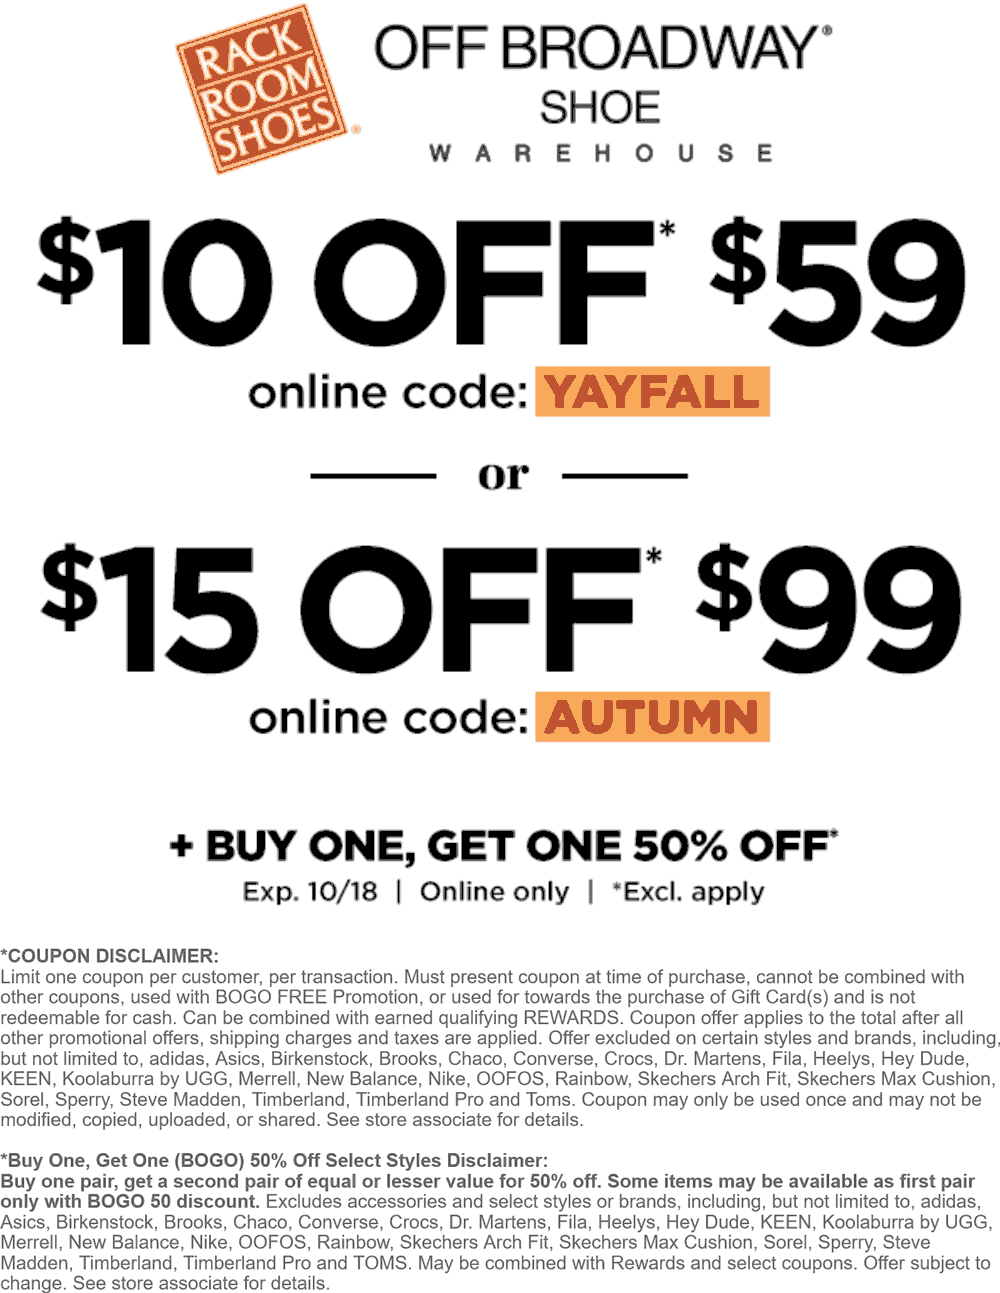 Rack Room Shoes stores Coupon  $10-$15 off $59+ today at Rack Room Shoes & Off Broadway Shoe Warehouse via promo code YAYFALL #rackroomshoes 